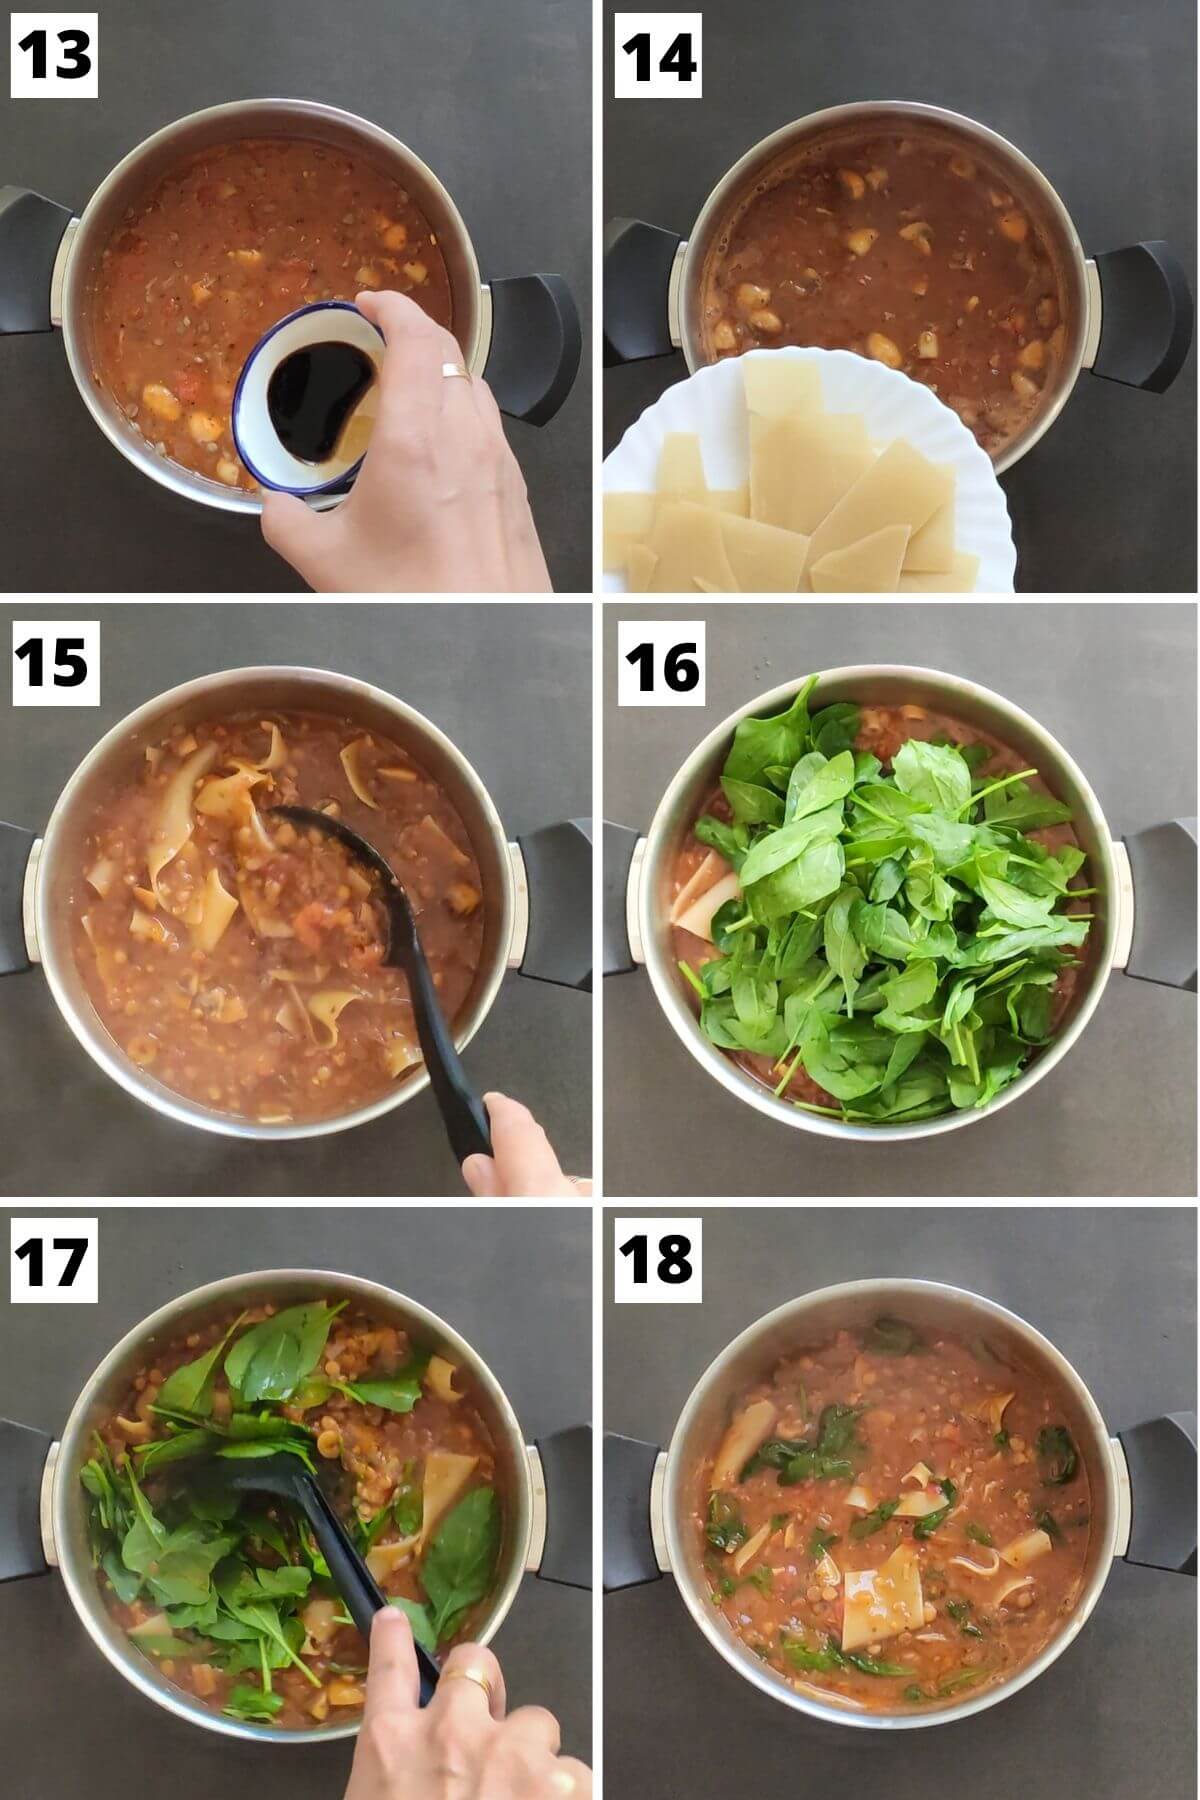 collage of steps 13 to 18 of vegan lasagna soup recipe